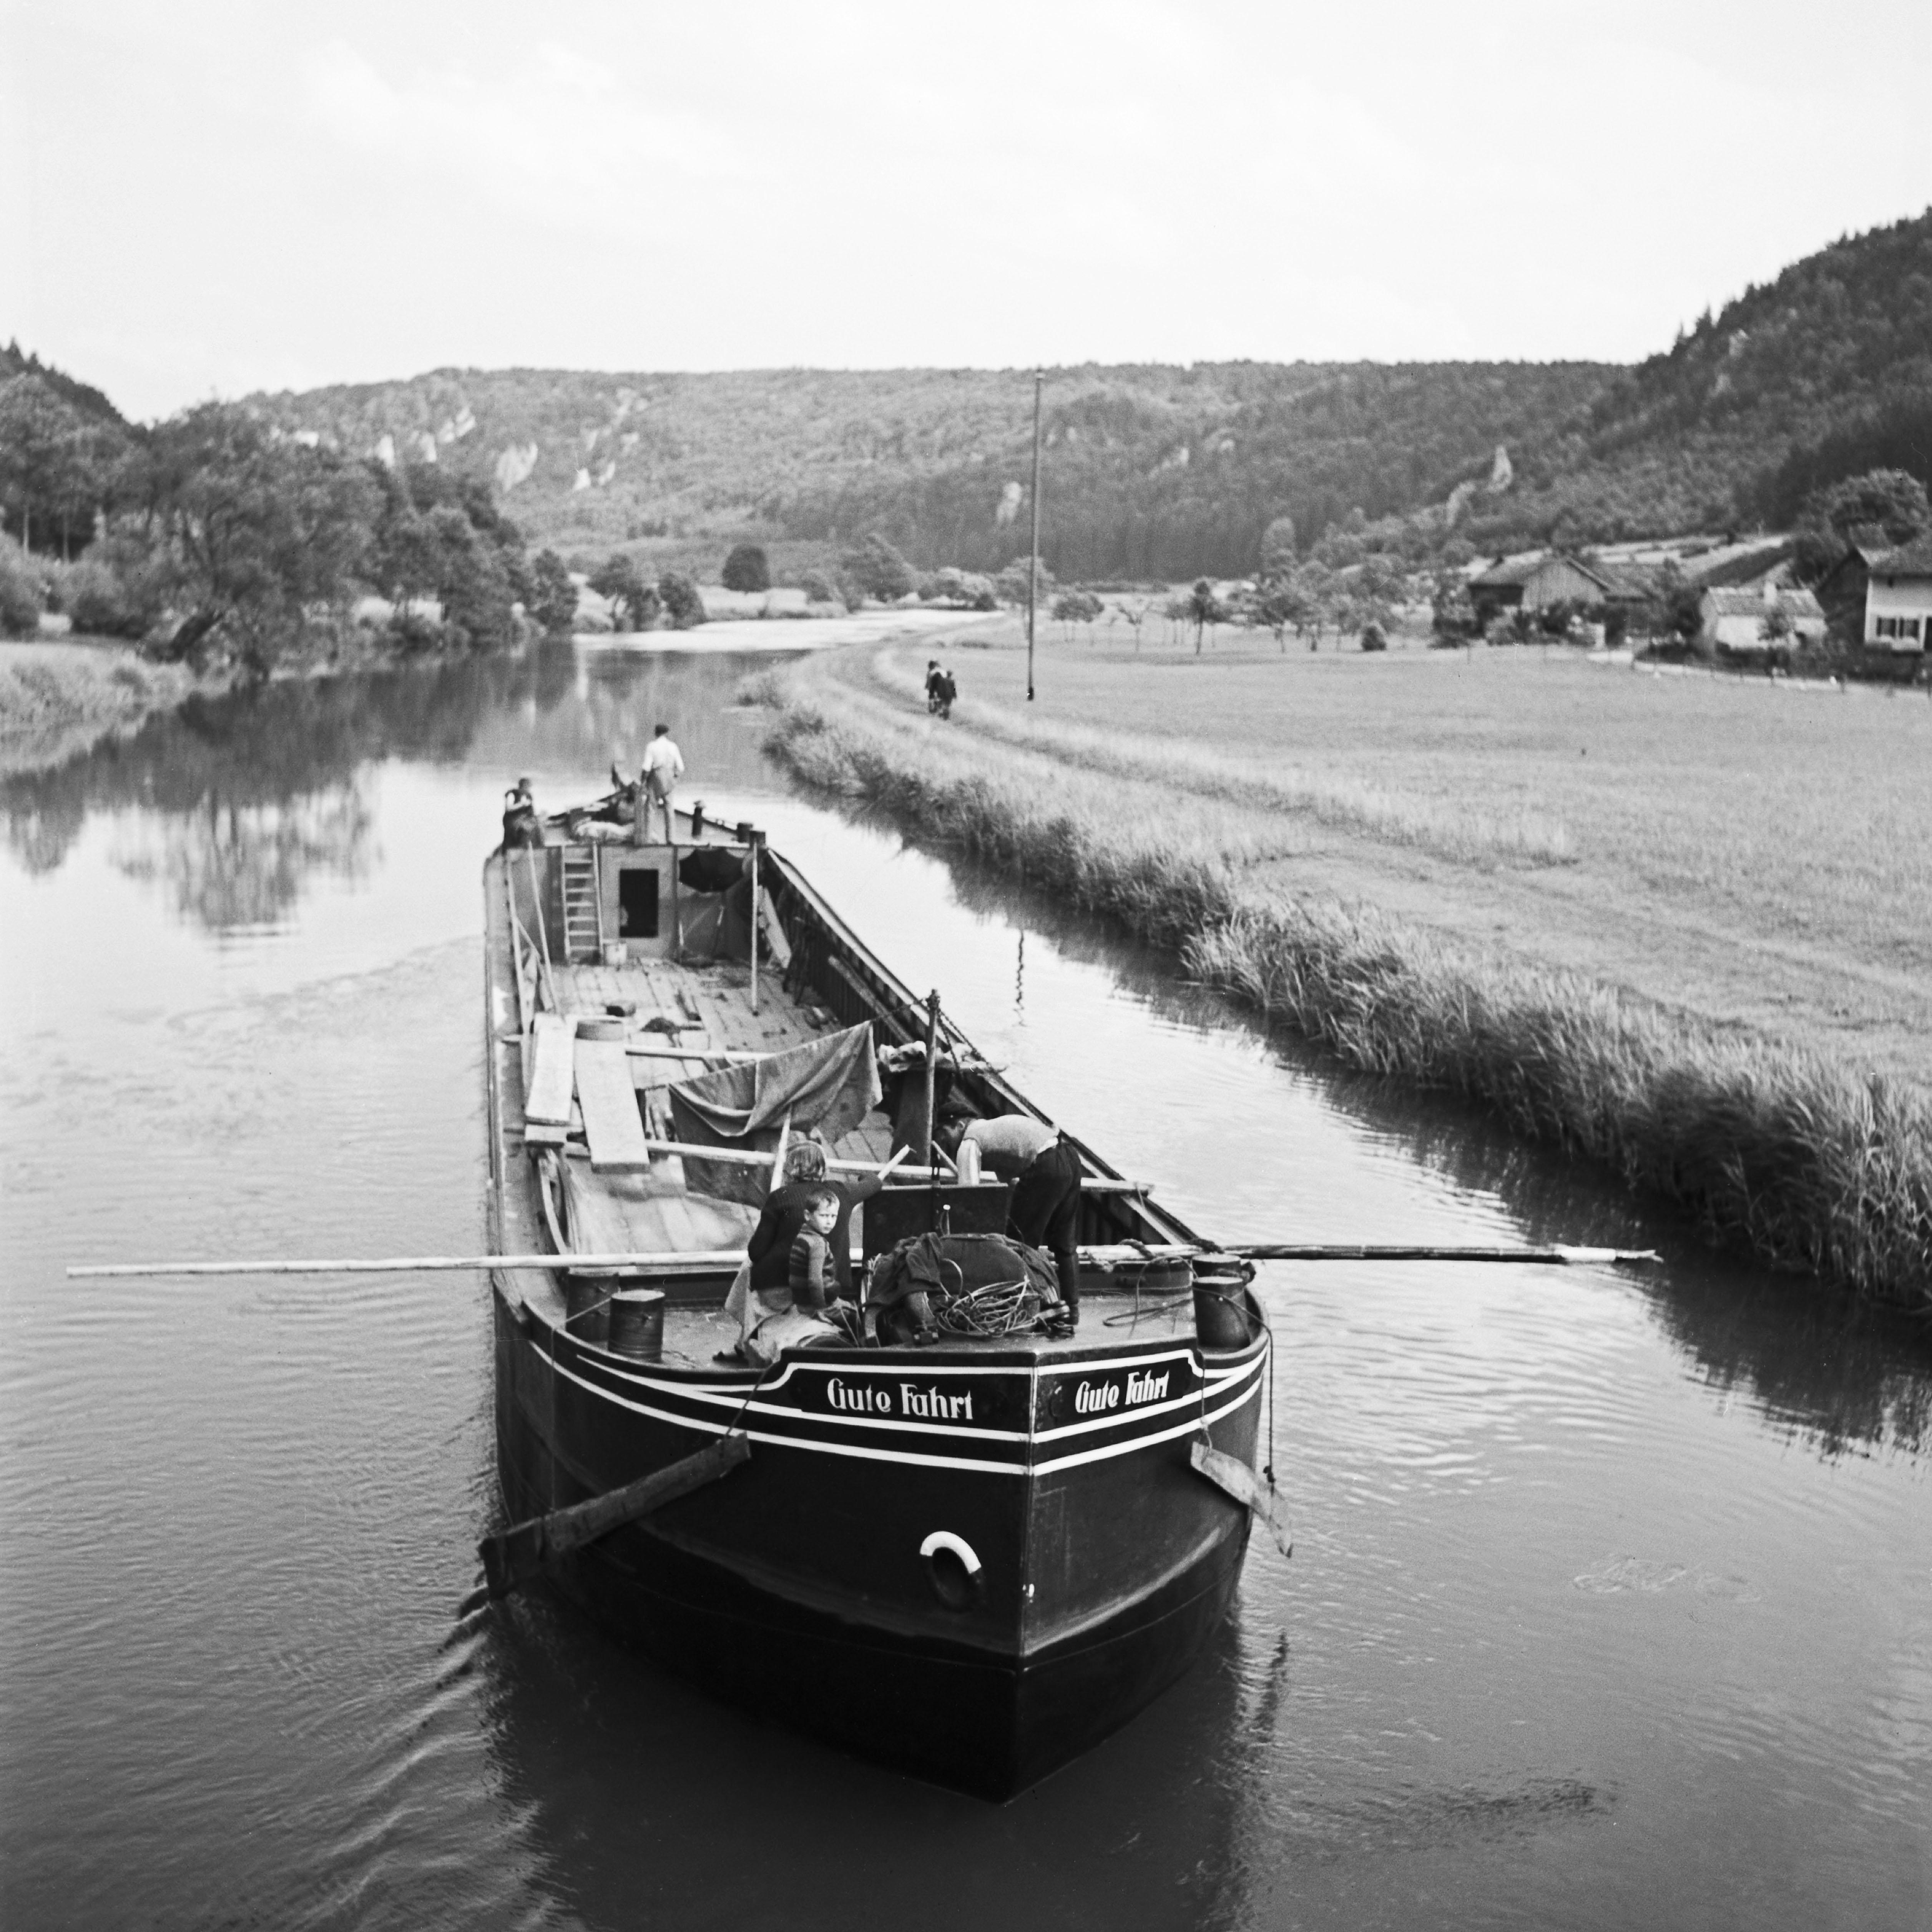 Karl Heinrich Lämmel Black and White Photograph - Freight ship on river Altmuehl at Altmuehltal valley, Germany 1937 Printed Later